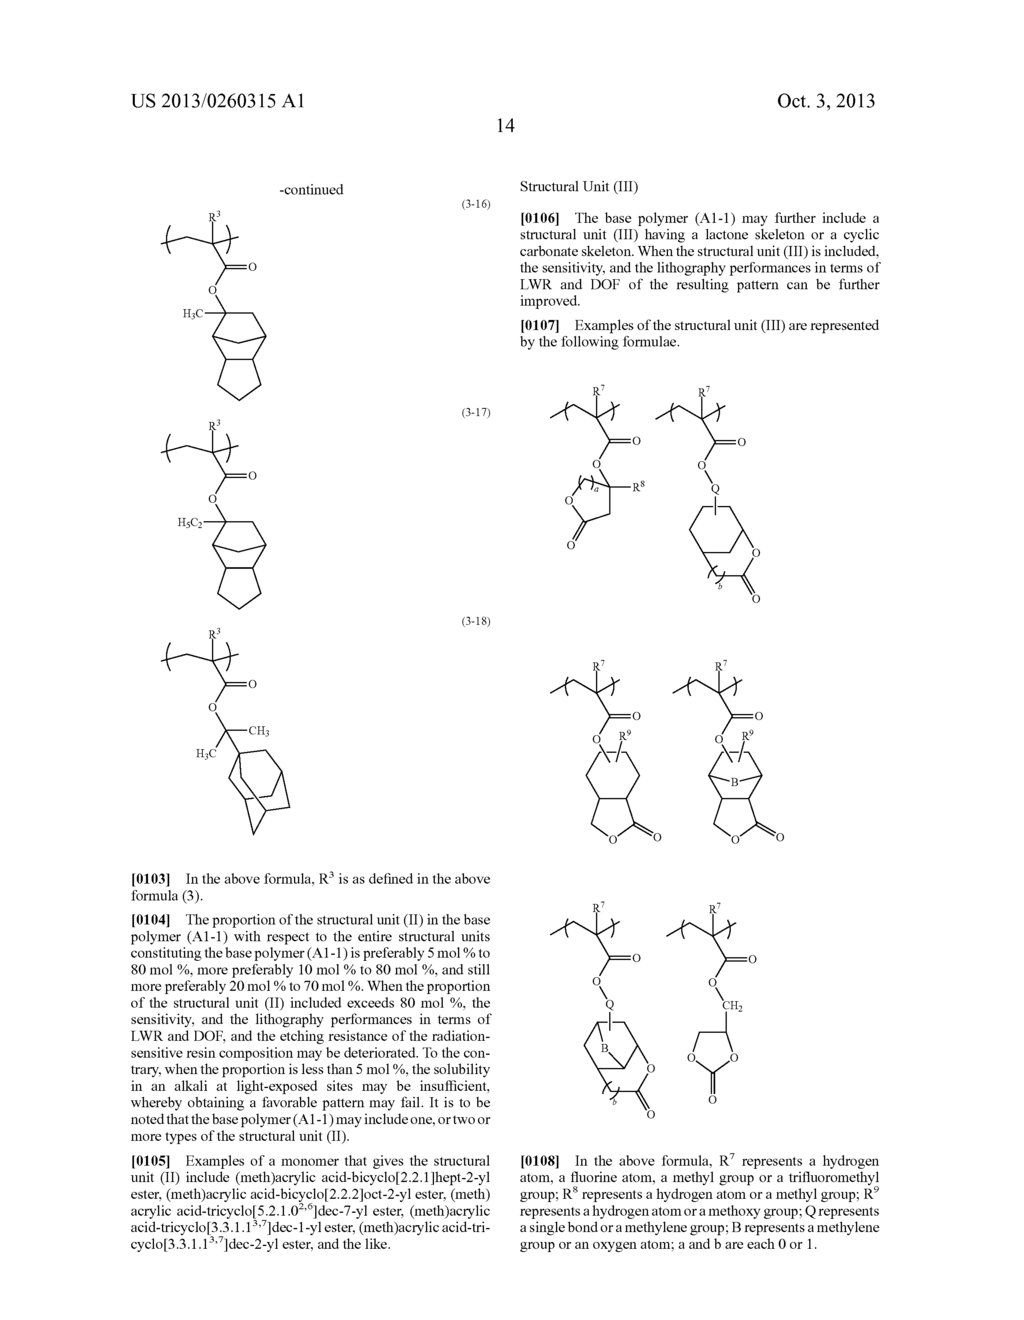 RADIATION-SENSITIVE RESIN COMPOSITION, PATTERN-FORMING METHOD, POLYMER,     AND COMPOUND - diagram, schematic, and image 15